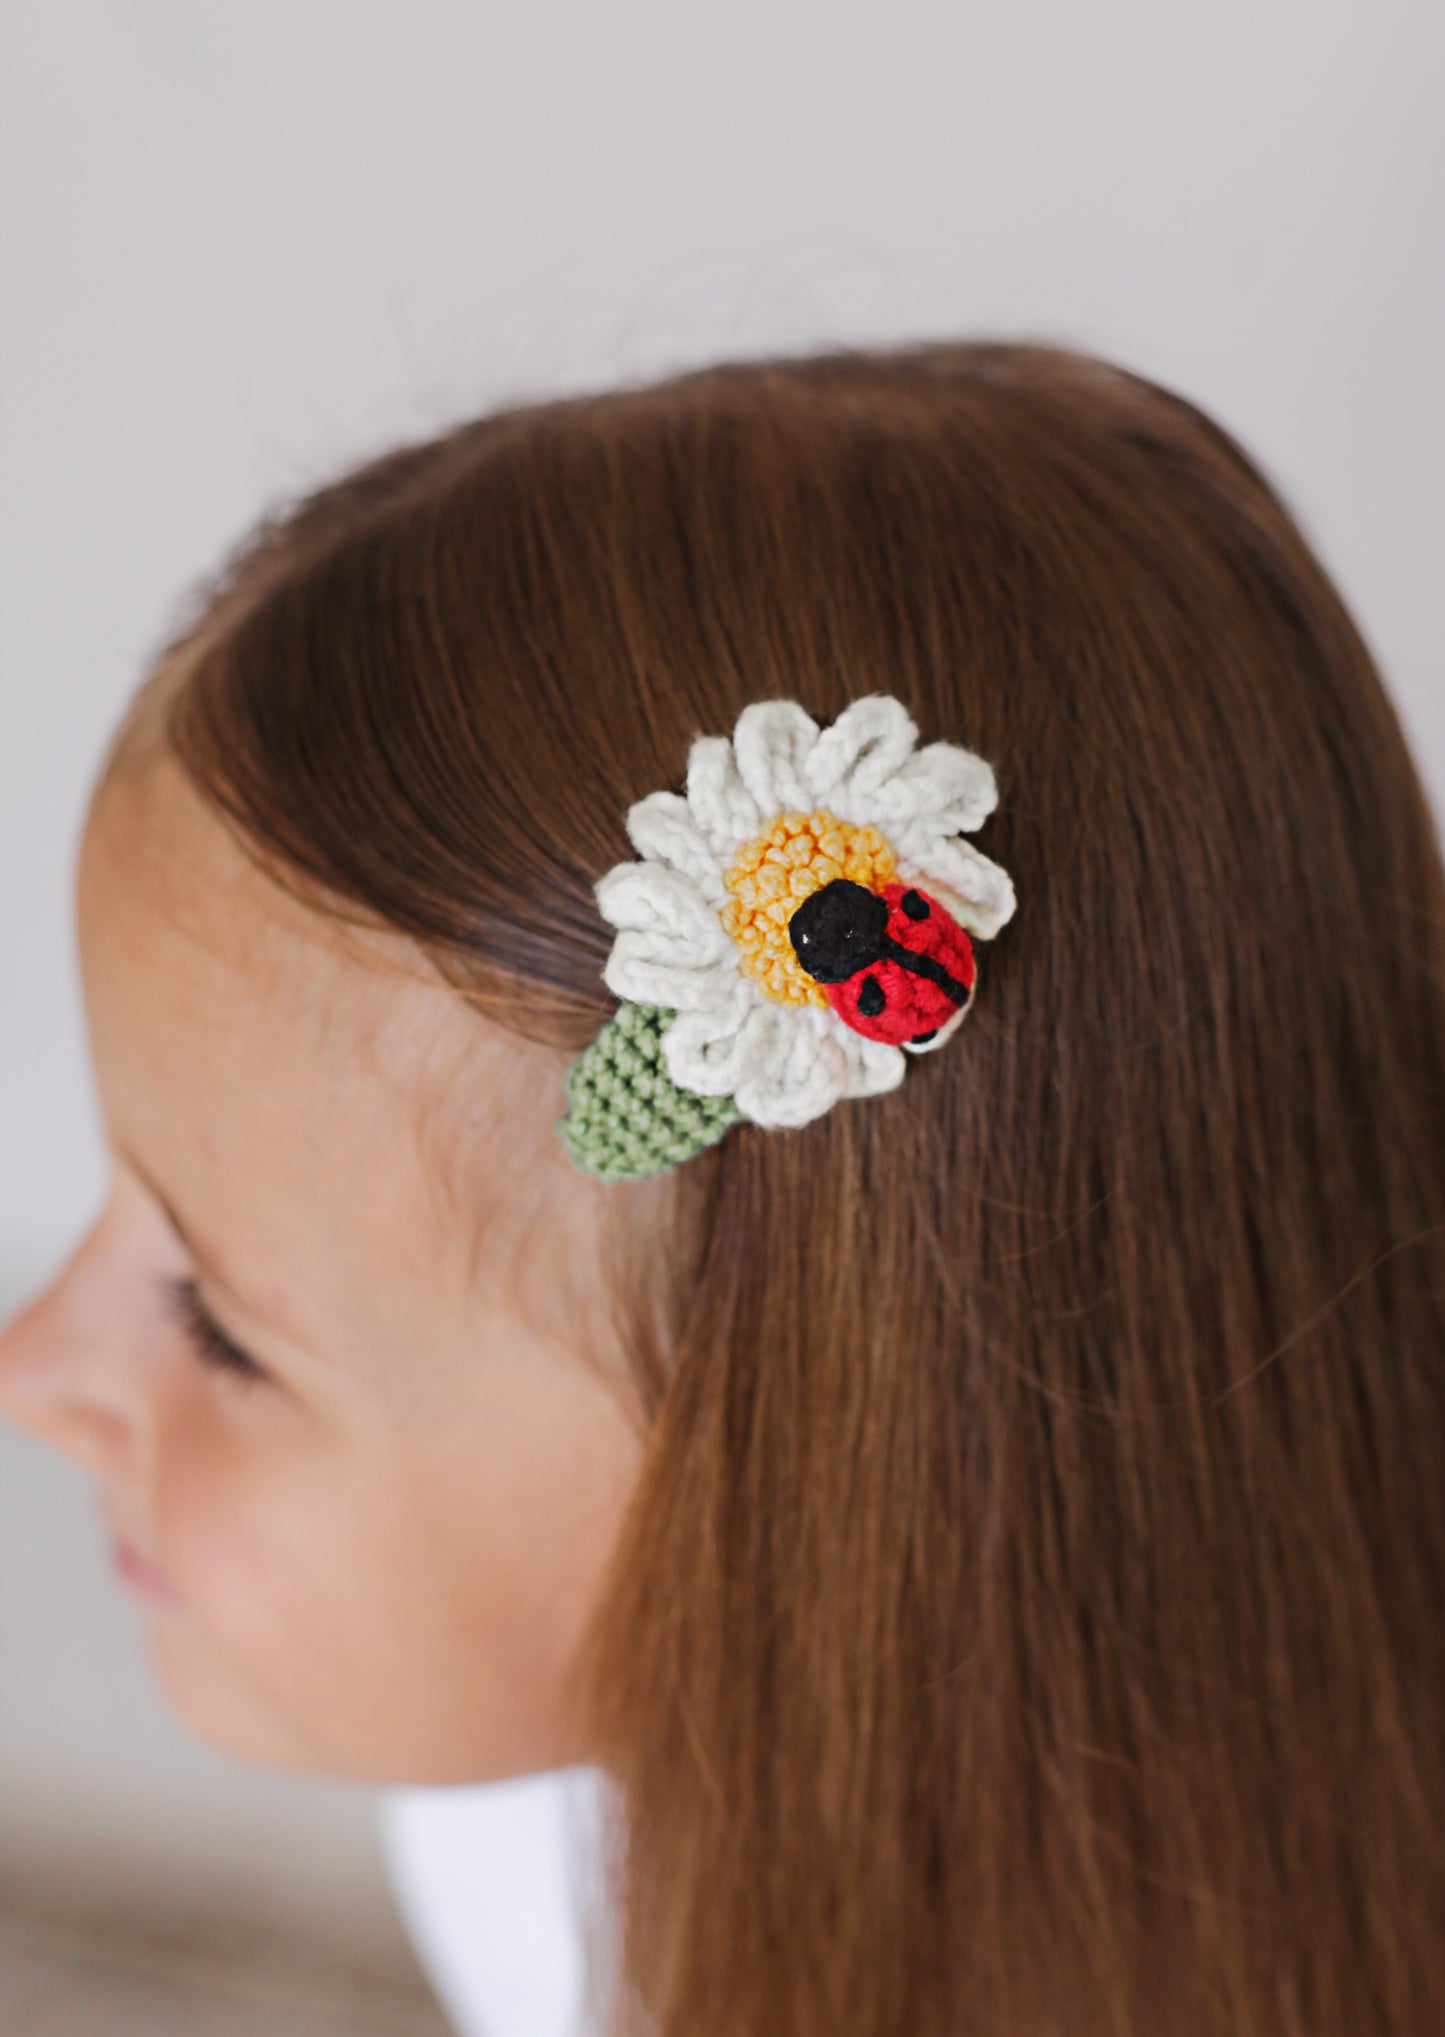 Ladybug Crochet Trendy Girls' Gifts : Crochet Hair Clips . Barrettes for Teens, Granddaughters, Newborn Girl Outfits, with Embroidery Designs